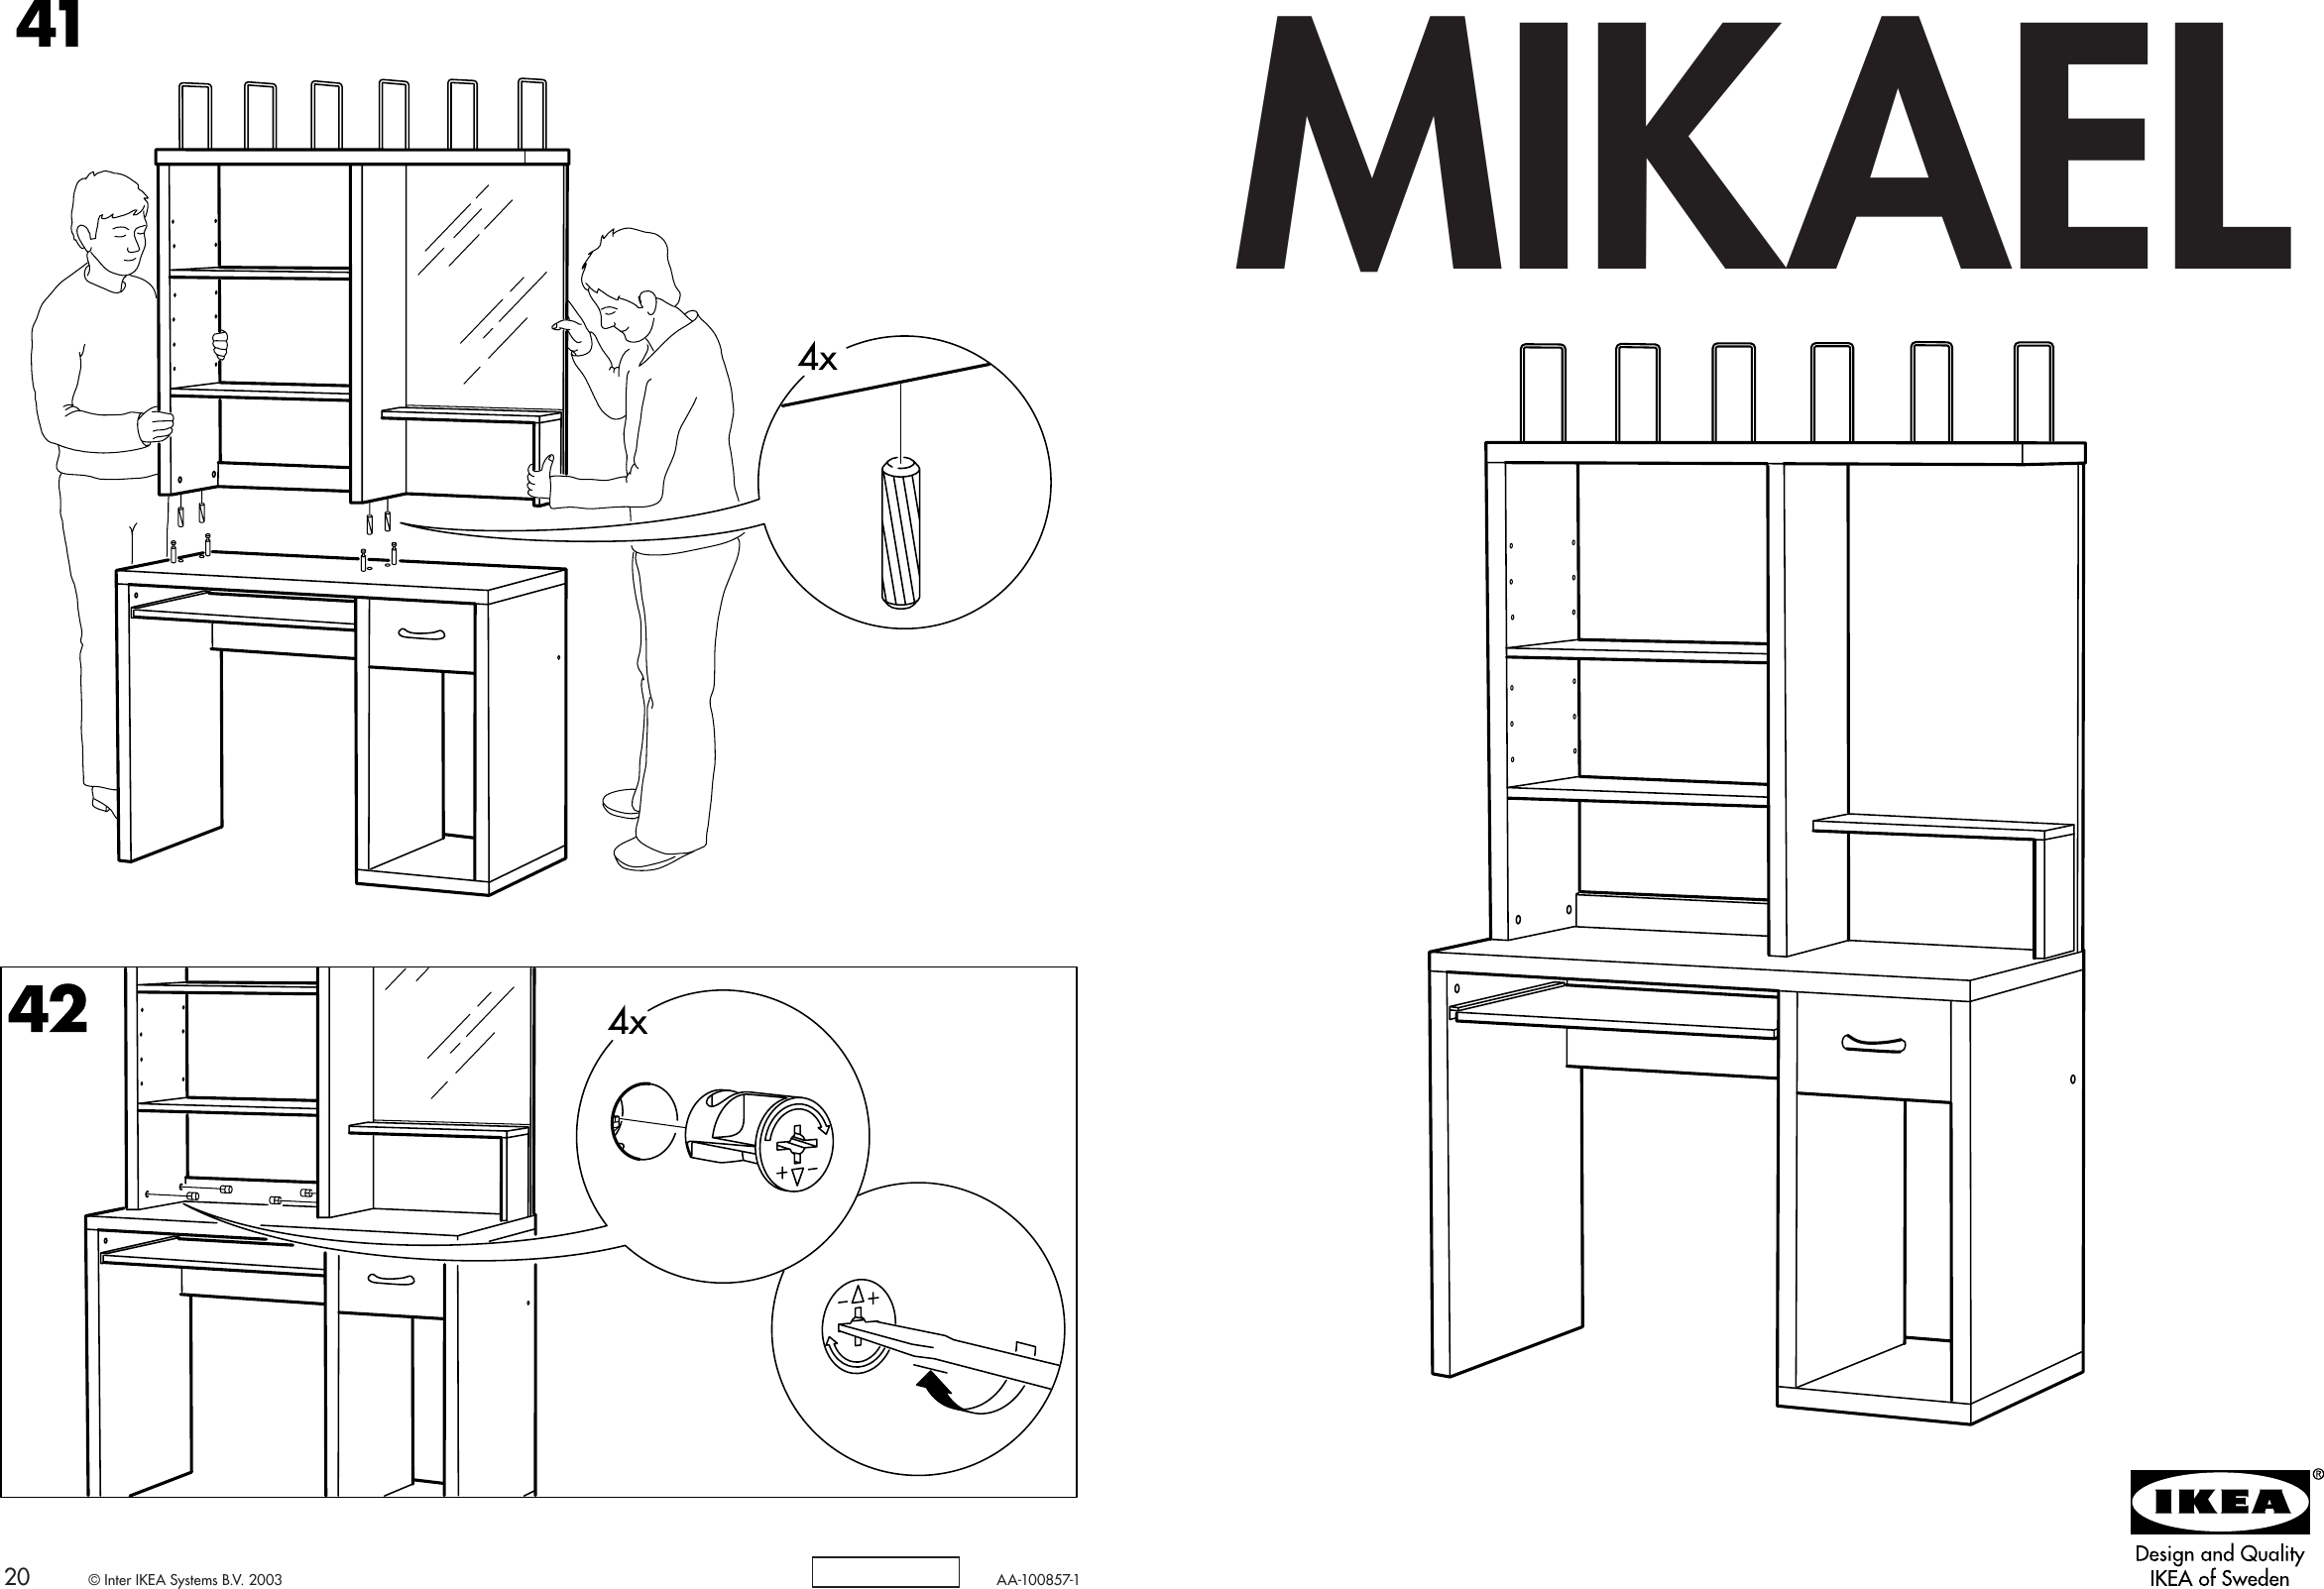 Ikea Mikael Computer Workstation 41x20 Assembly Instruction 2